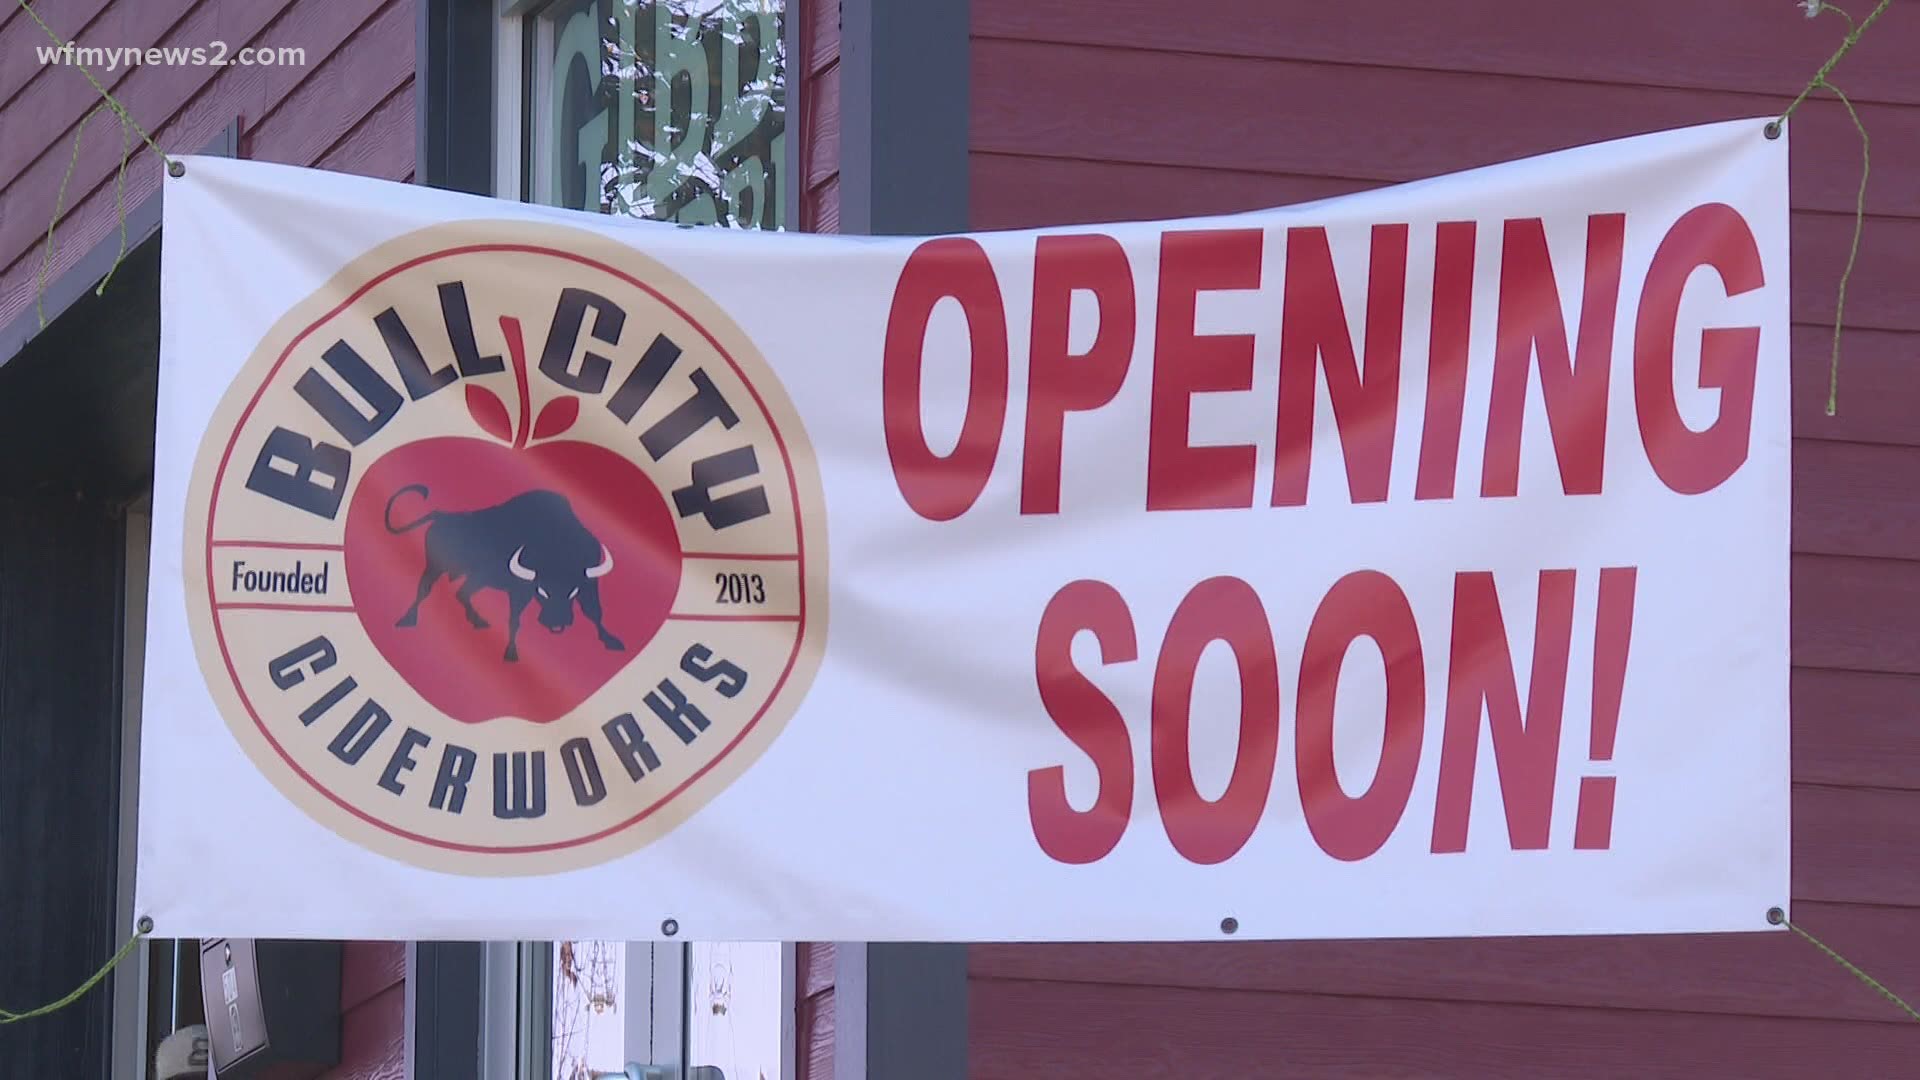 The popular cider spot said they're moving into the old Gibbs location on State Street in Greensboro.